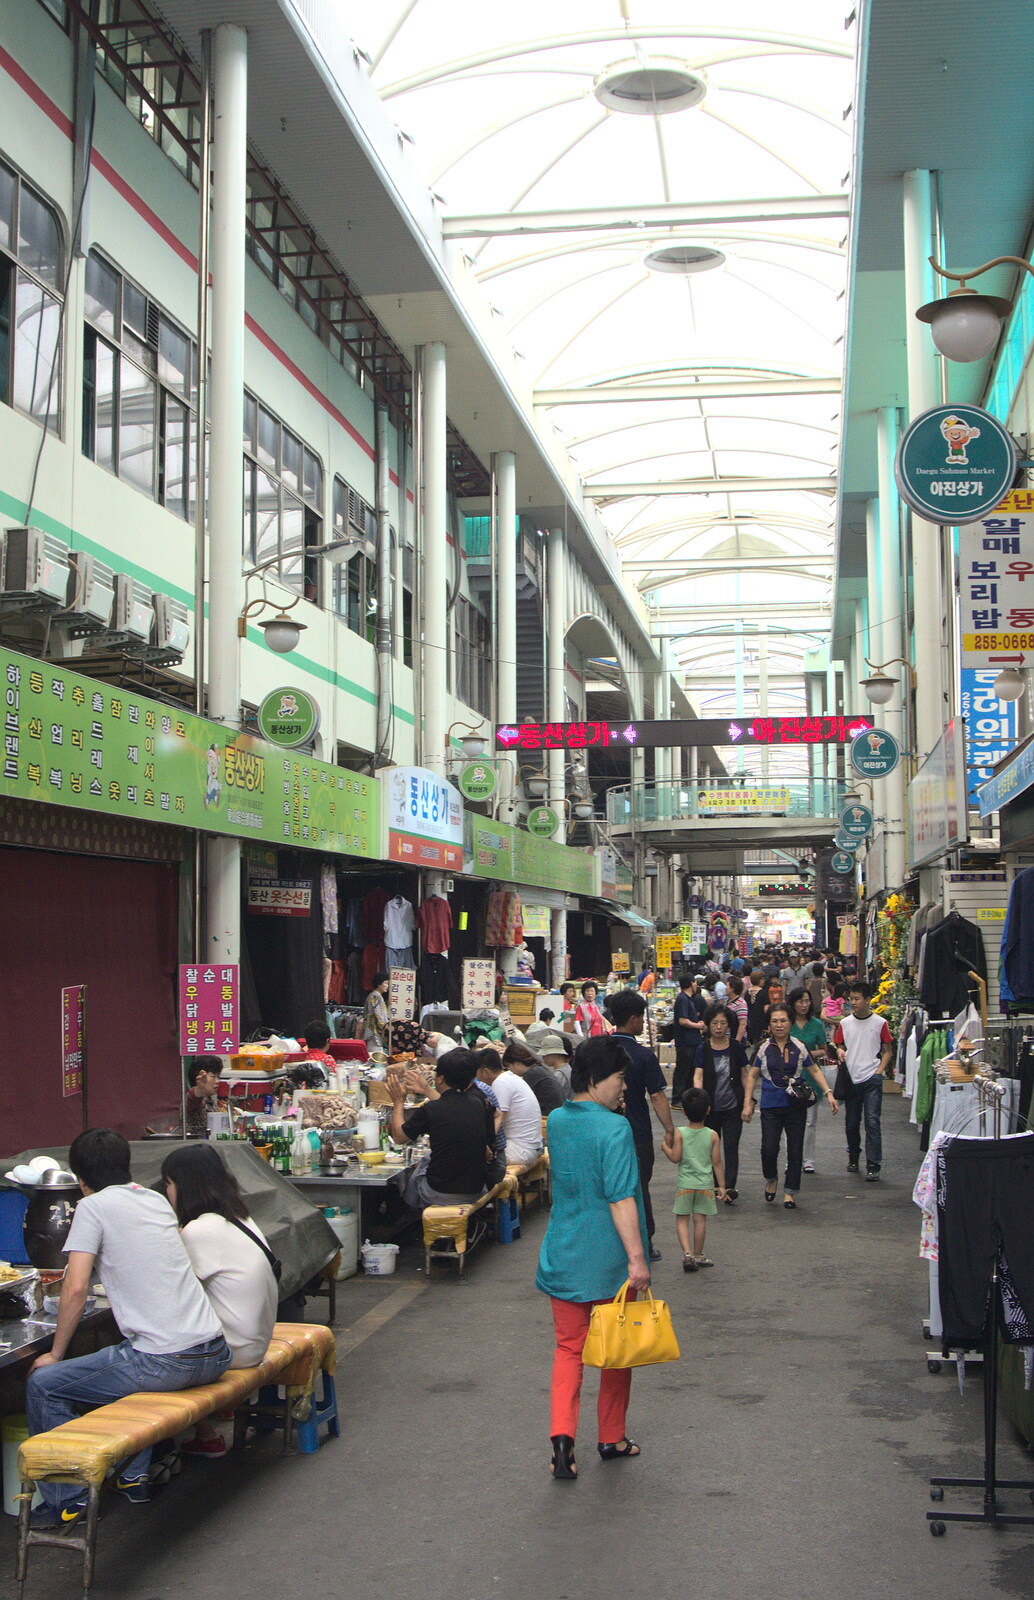 The covered lanes of the market from Seomun Market, Daegu, South Korea - 1st July 2012